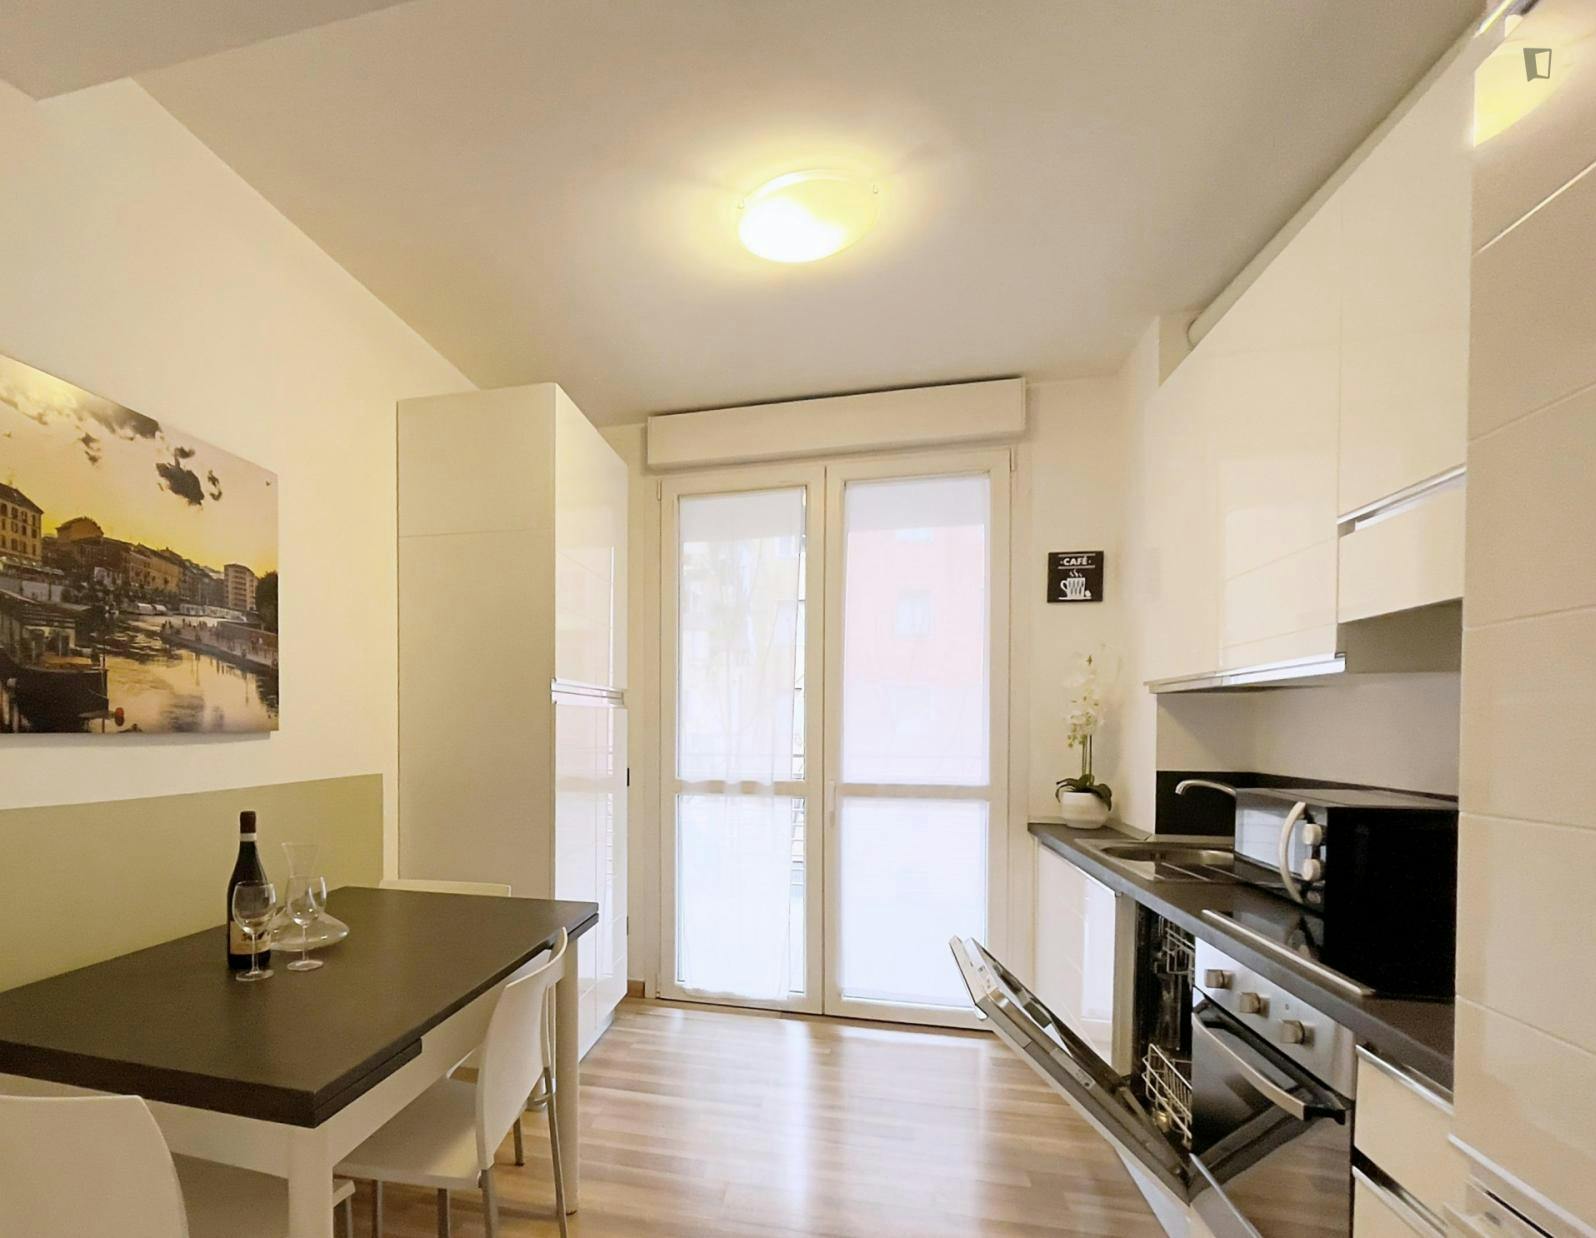 Spacious 2-bedroom flat a few steps from the Politecnico Bovisa Campus